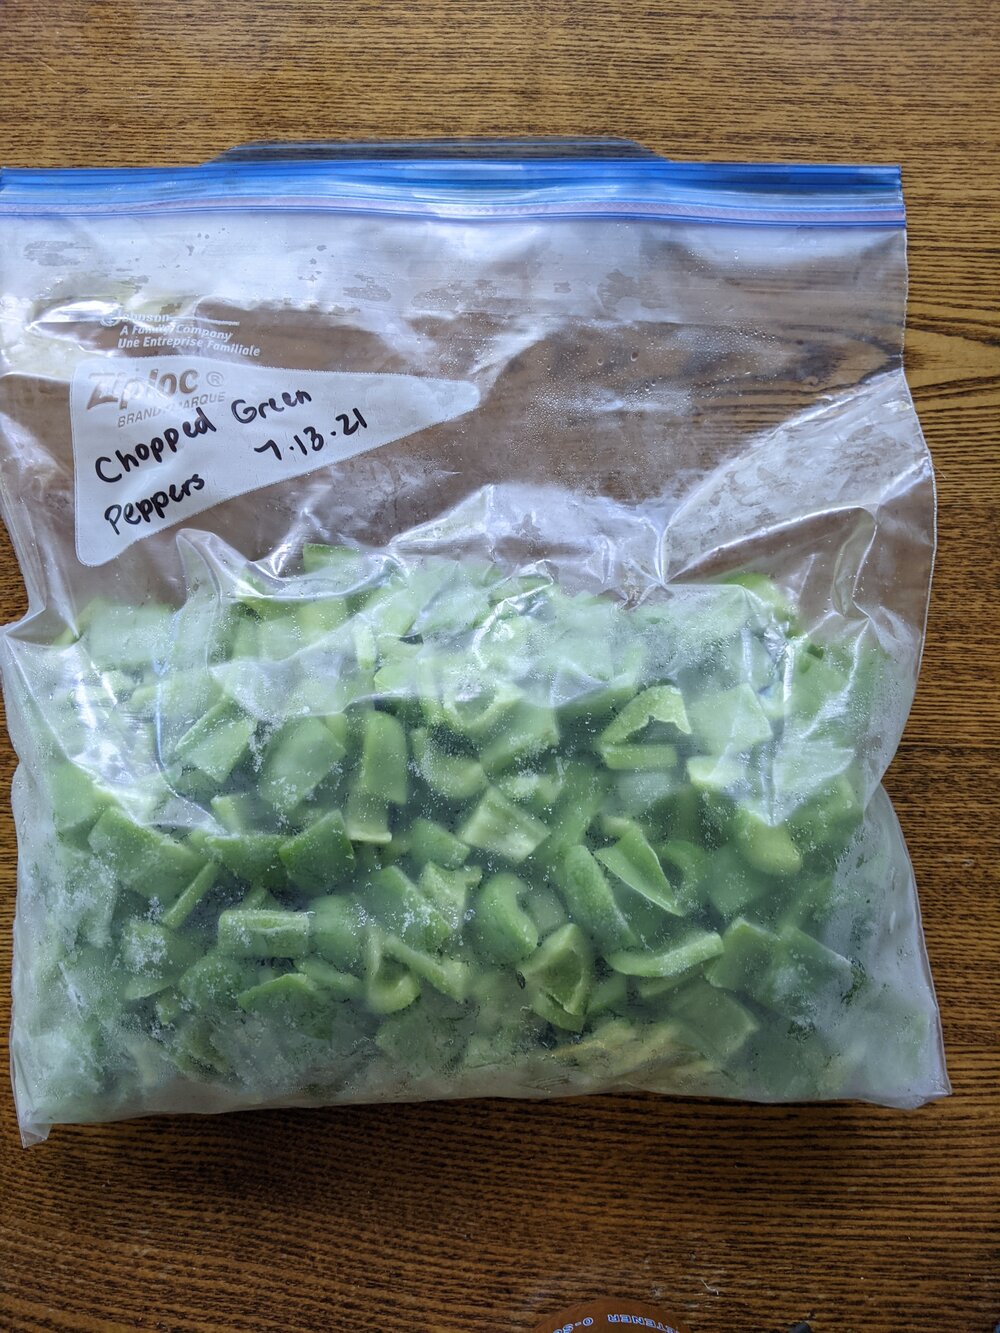 Step 5: Store frozen chopped peppers in bag.